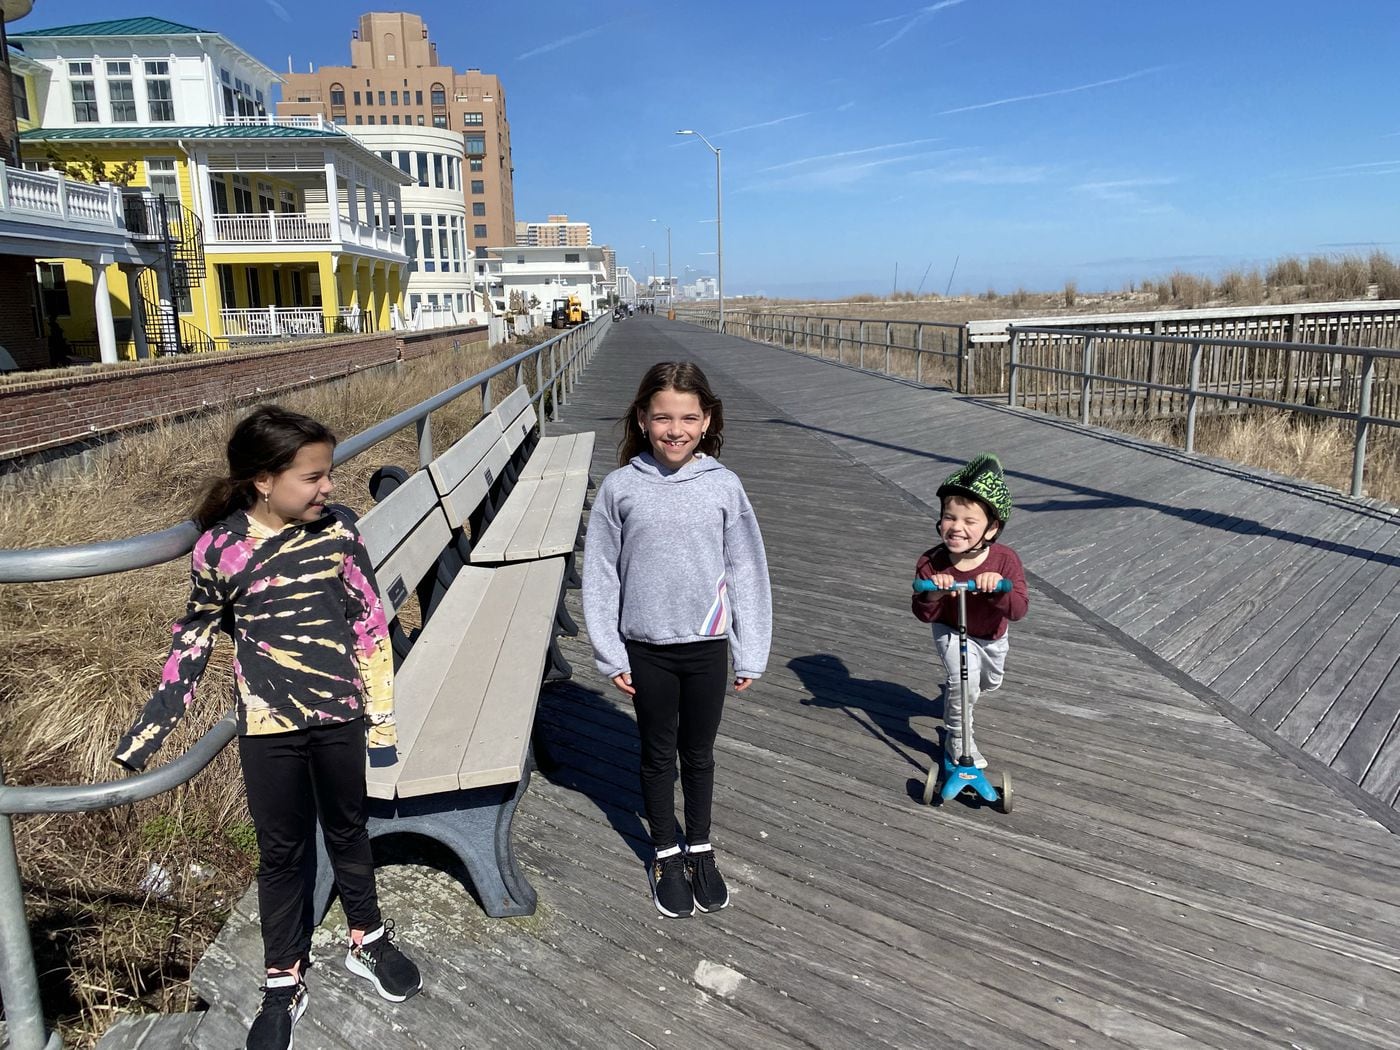 The Fishman twins, second-graders from Philadelphia, and their cousin, on the Ventnor Boardwalk. Their mom, Rachel, says she came to their shore home "so my kids could have fresh air, more space."